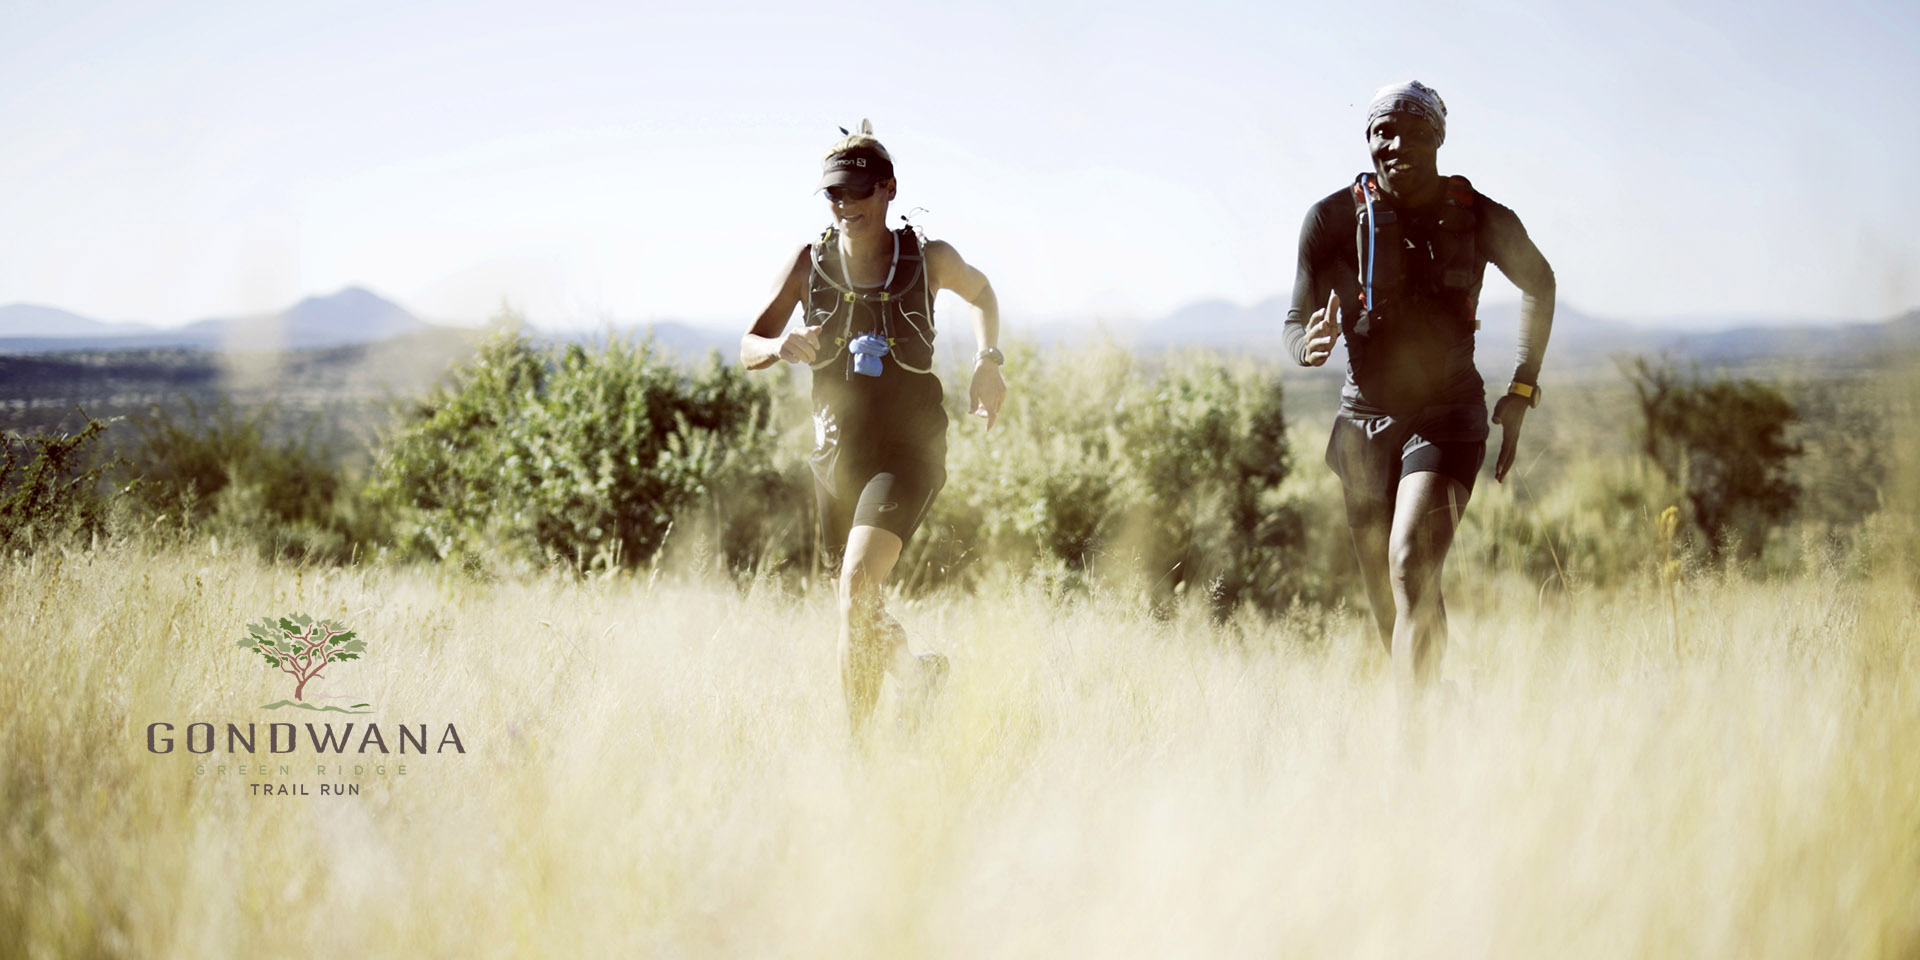 Trail runners in Namibia